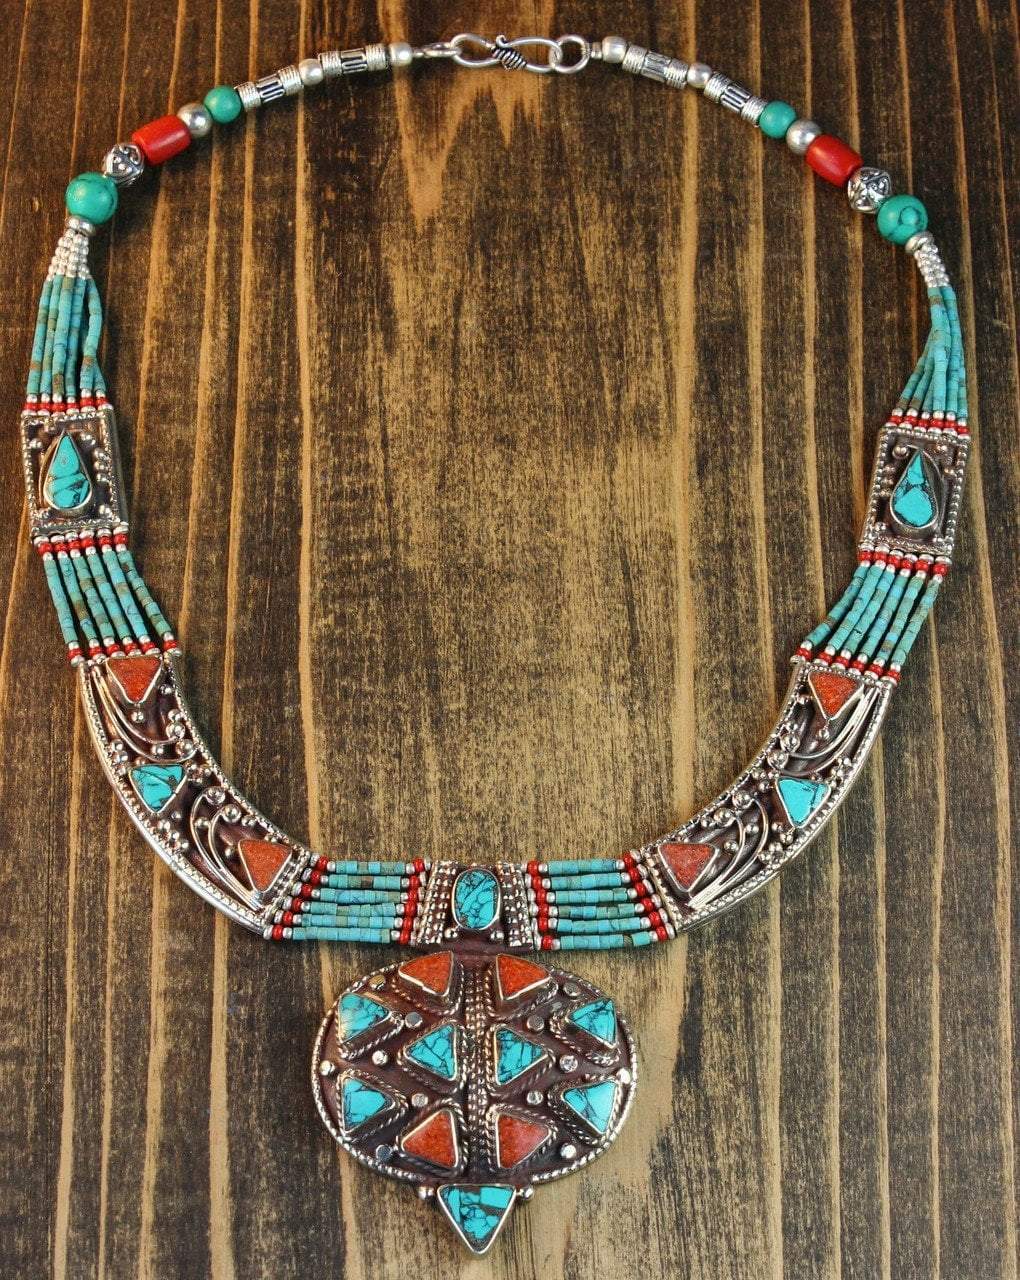 BEAUTIFUL TURQUOISE CORAL NECKLACE - Tibet Arts & Healing